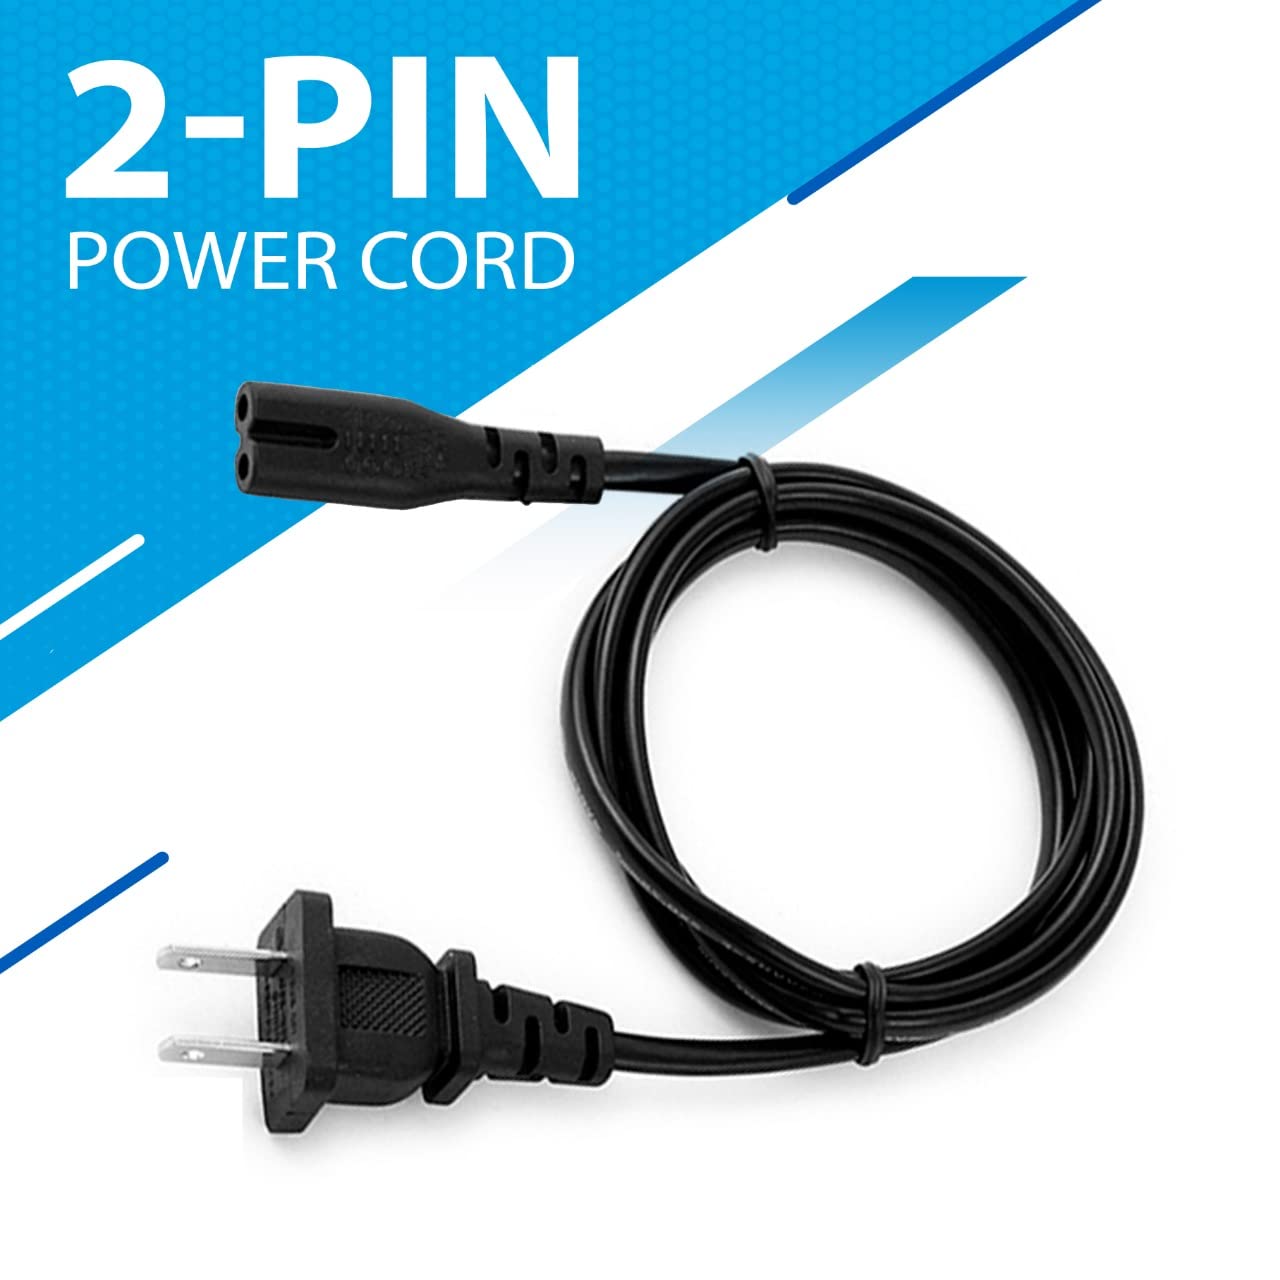 AC 2 Prong C8 Power Cord 5ft Standard 2-Slot for TV PS4 PS5 Speaker Monitor Xbox Wall Power Cable Replacement Black